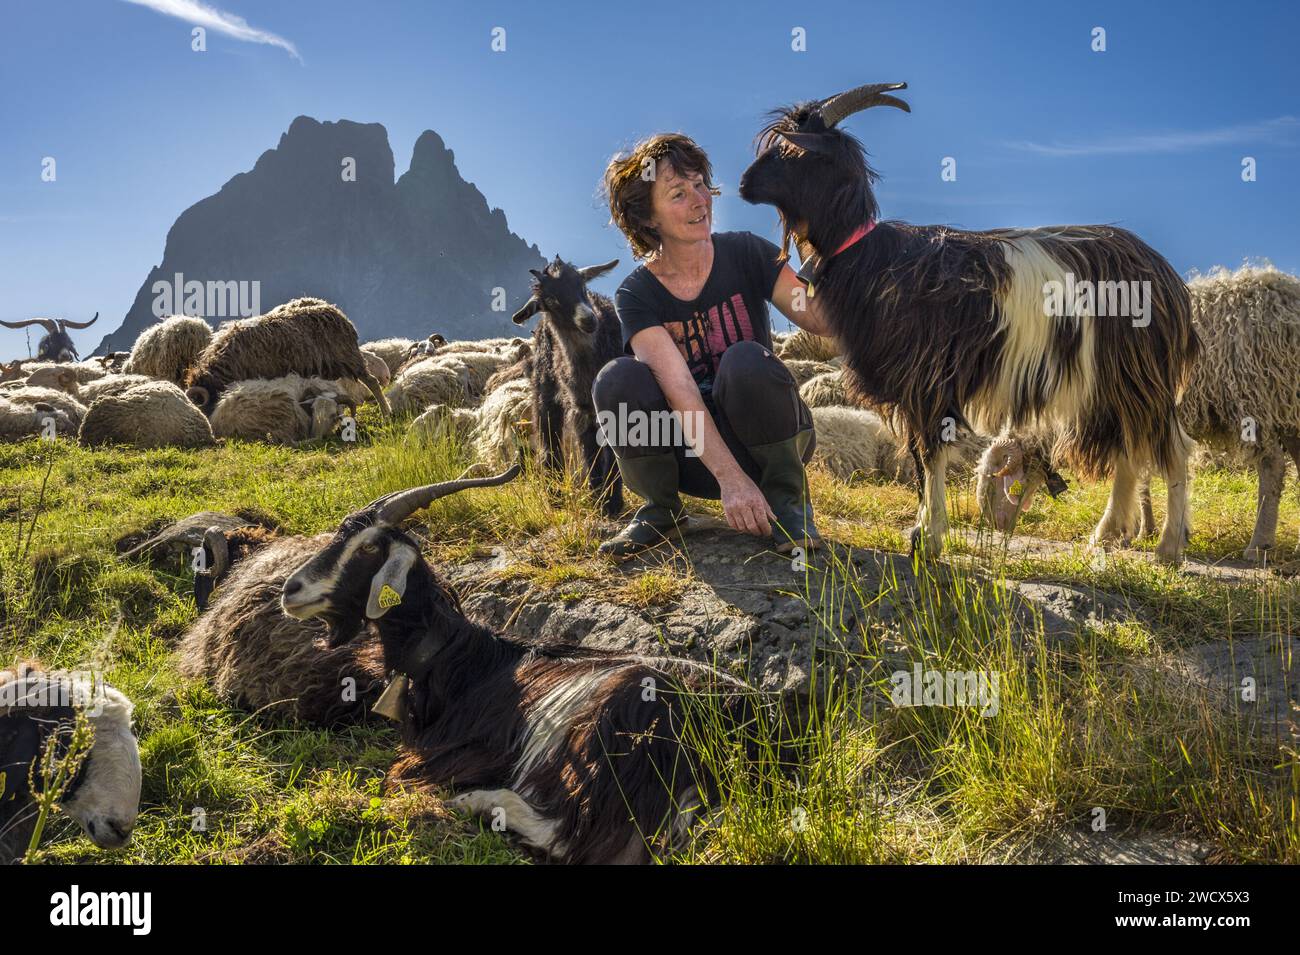 France, Pyrenees Atlantiques, Béarn, Ossau valley, Pyrenees National Park, Roumassot hut, shepherdess and her flock of sheep and goats, Pic du Midi d'Ossau in background Stock Photo